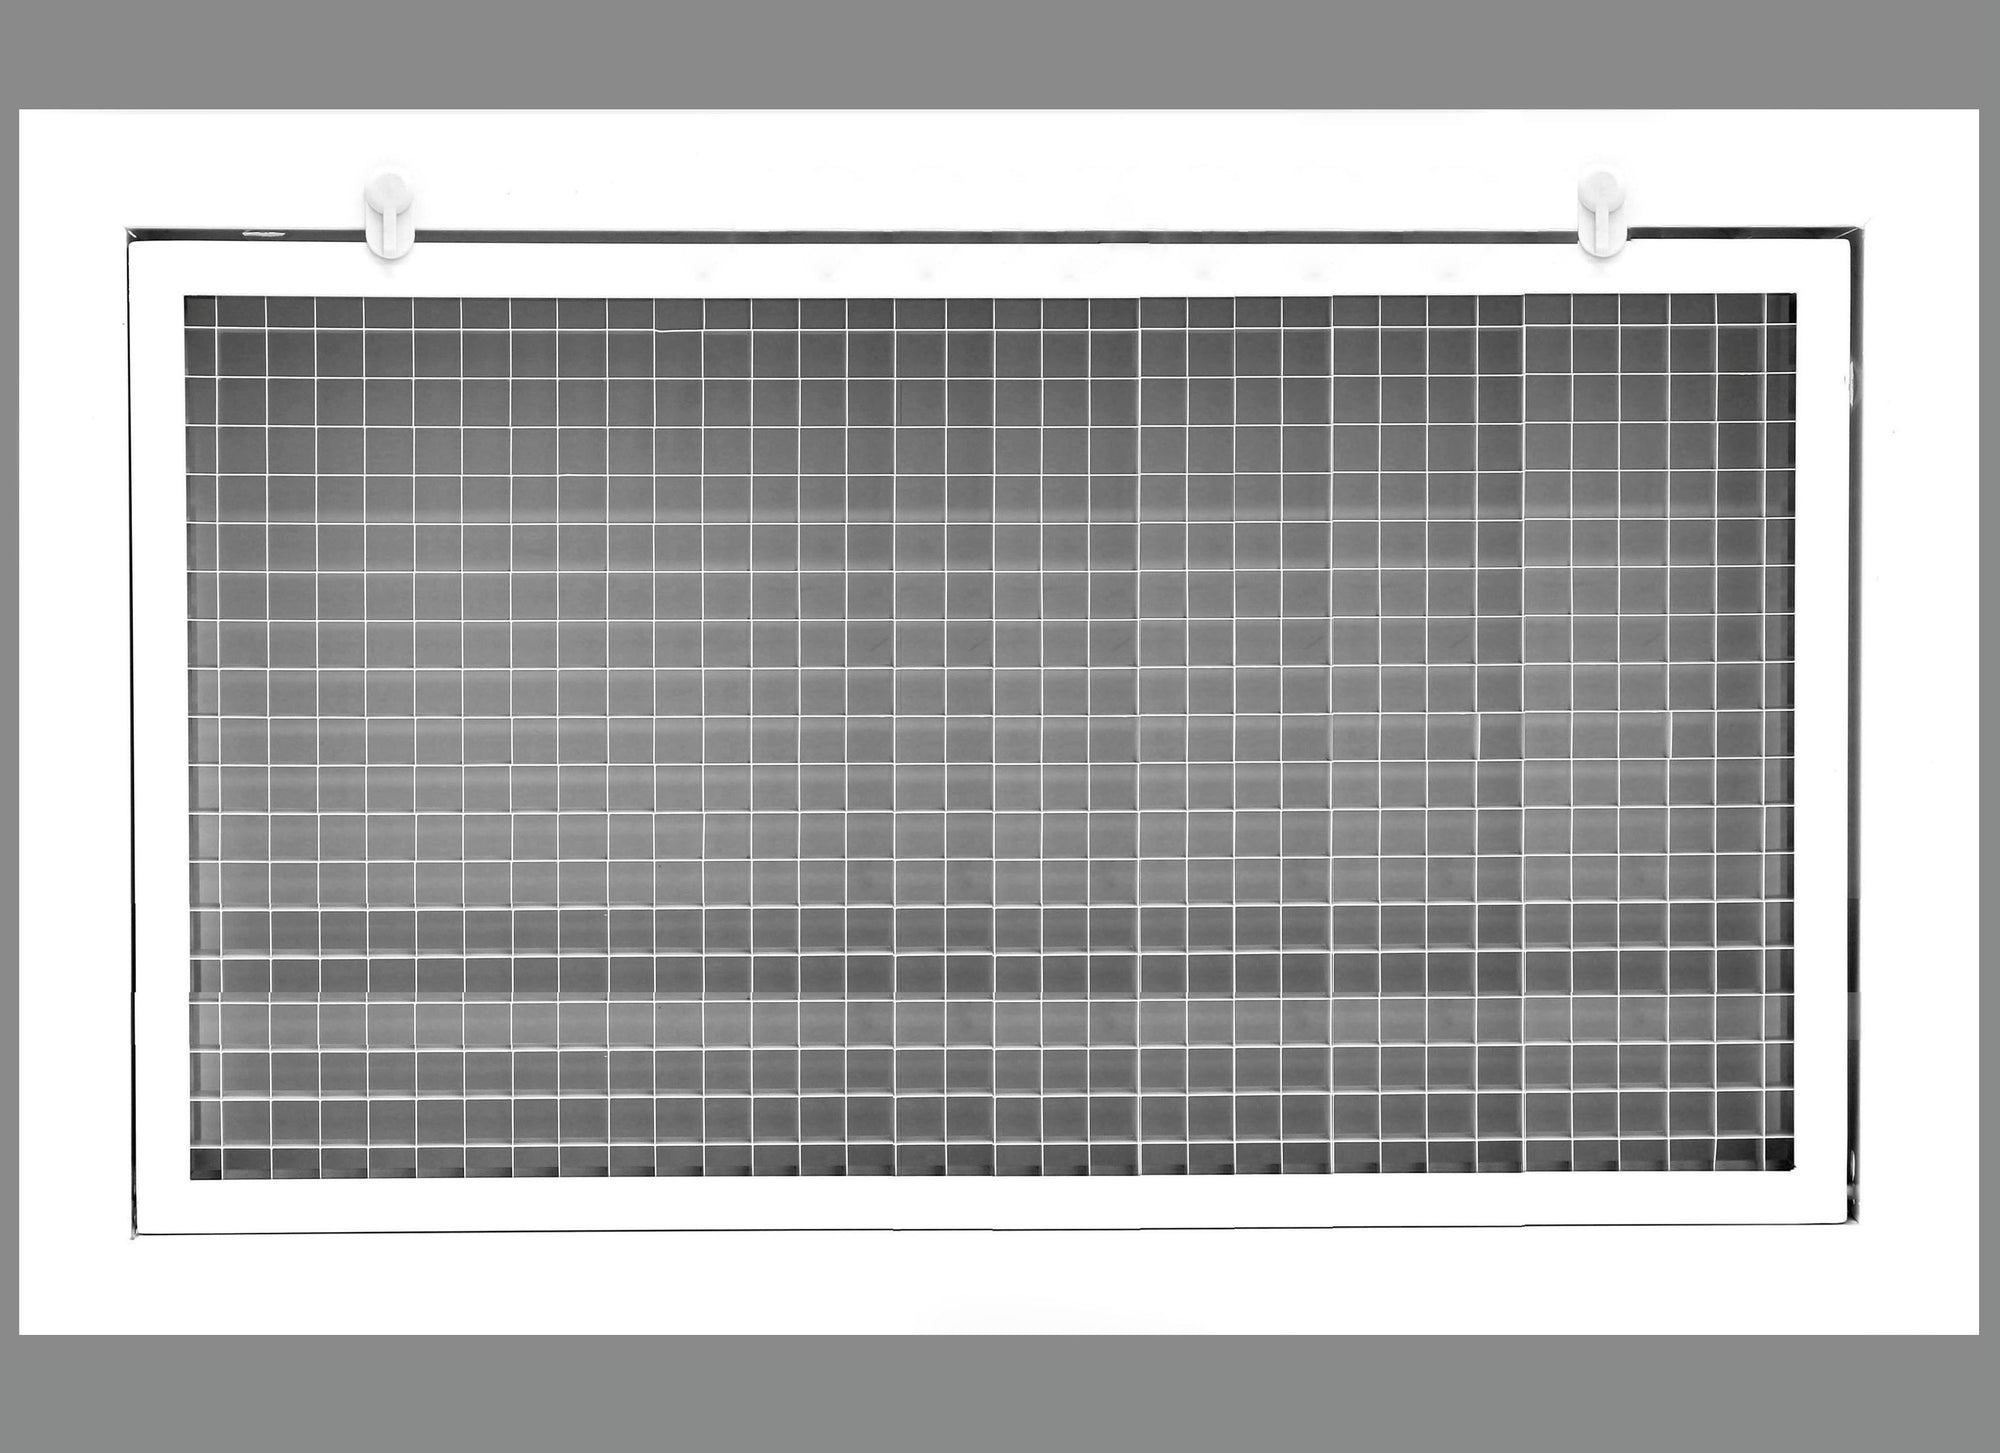 32" x 20" Cube Core Eggcrate Return Air Filter Grille for 1" Filter